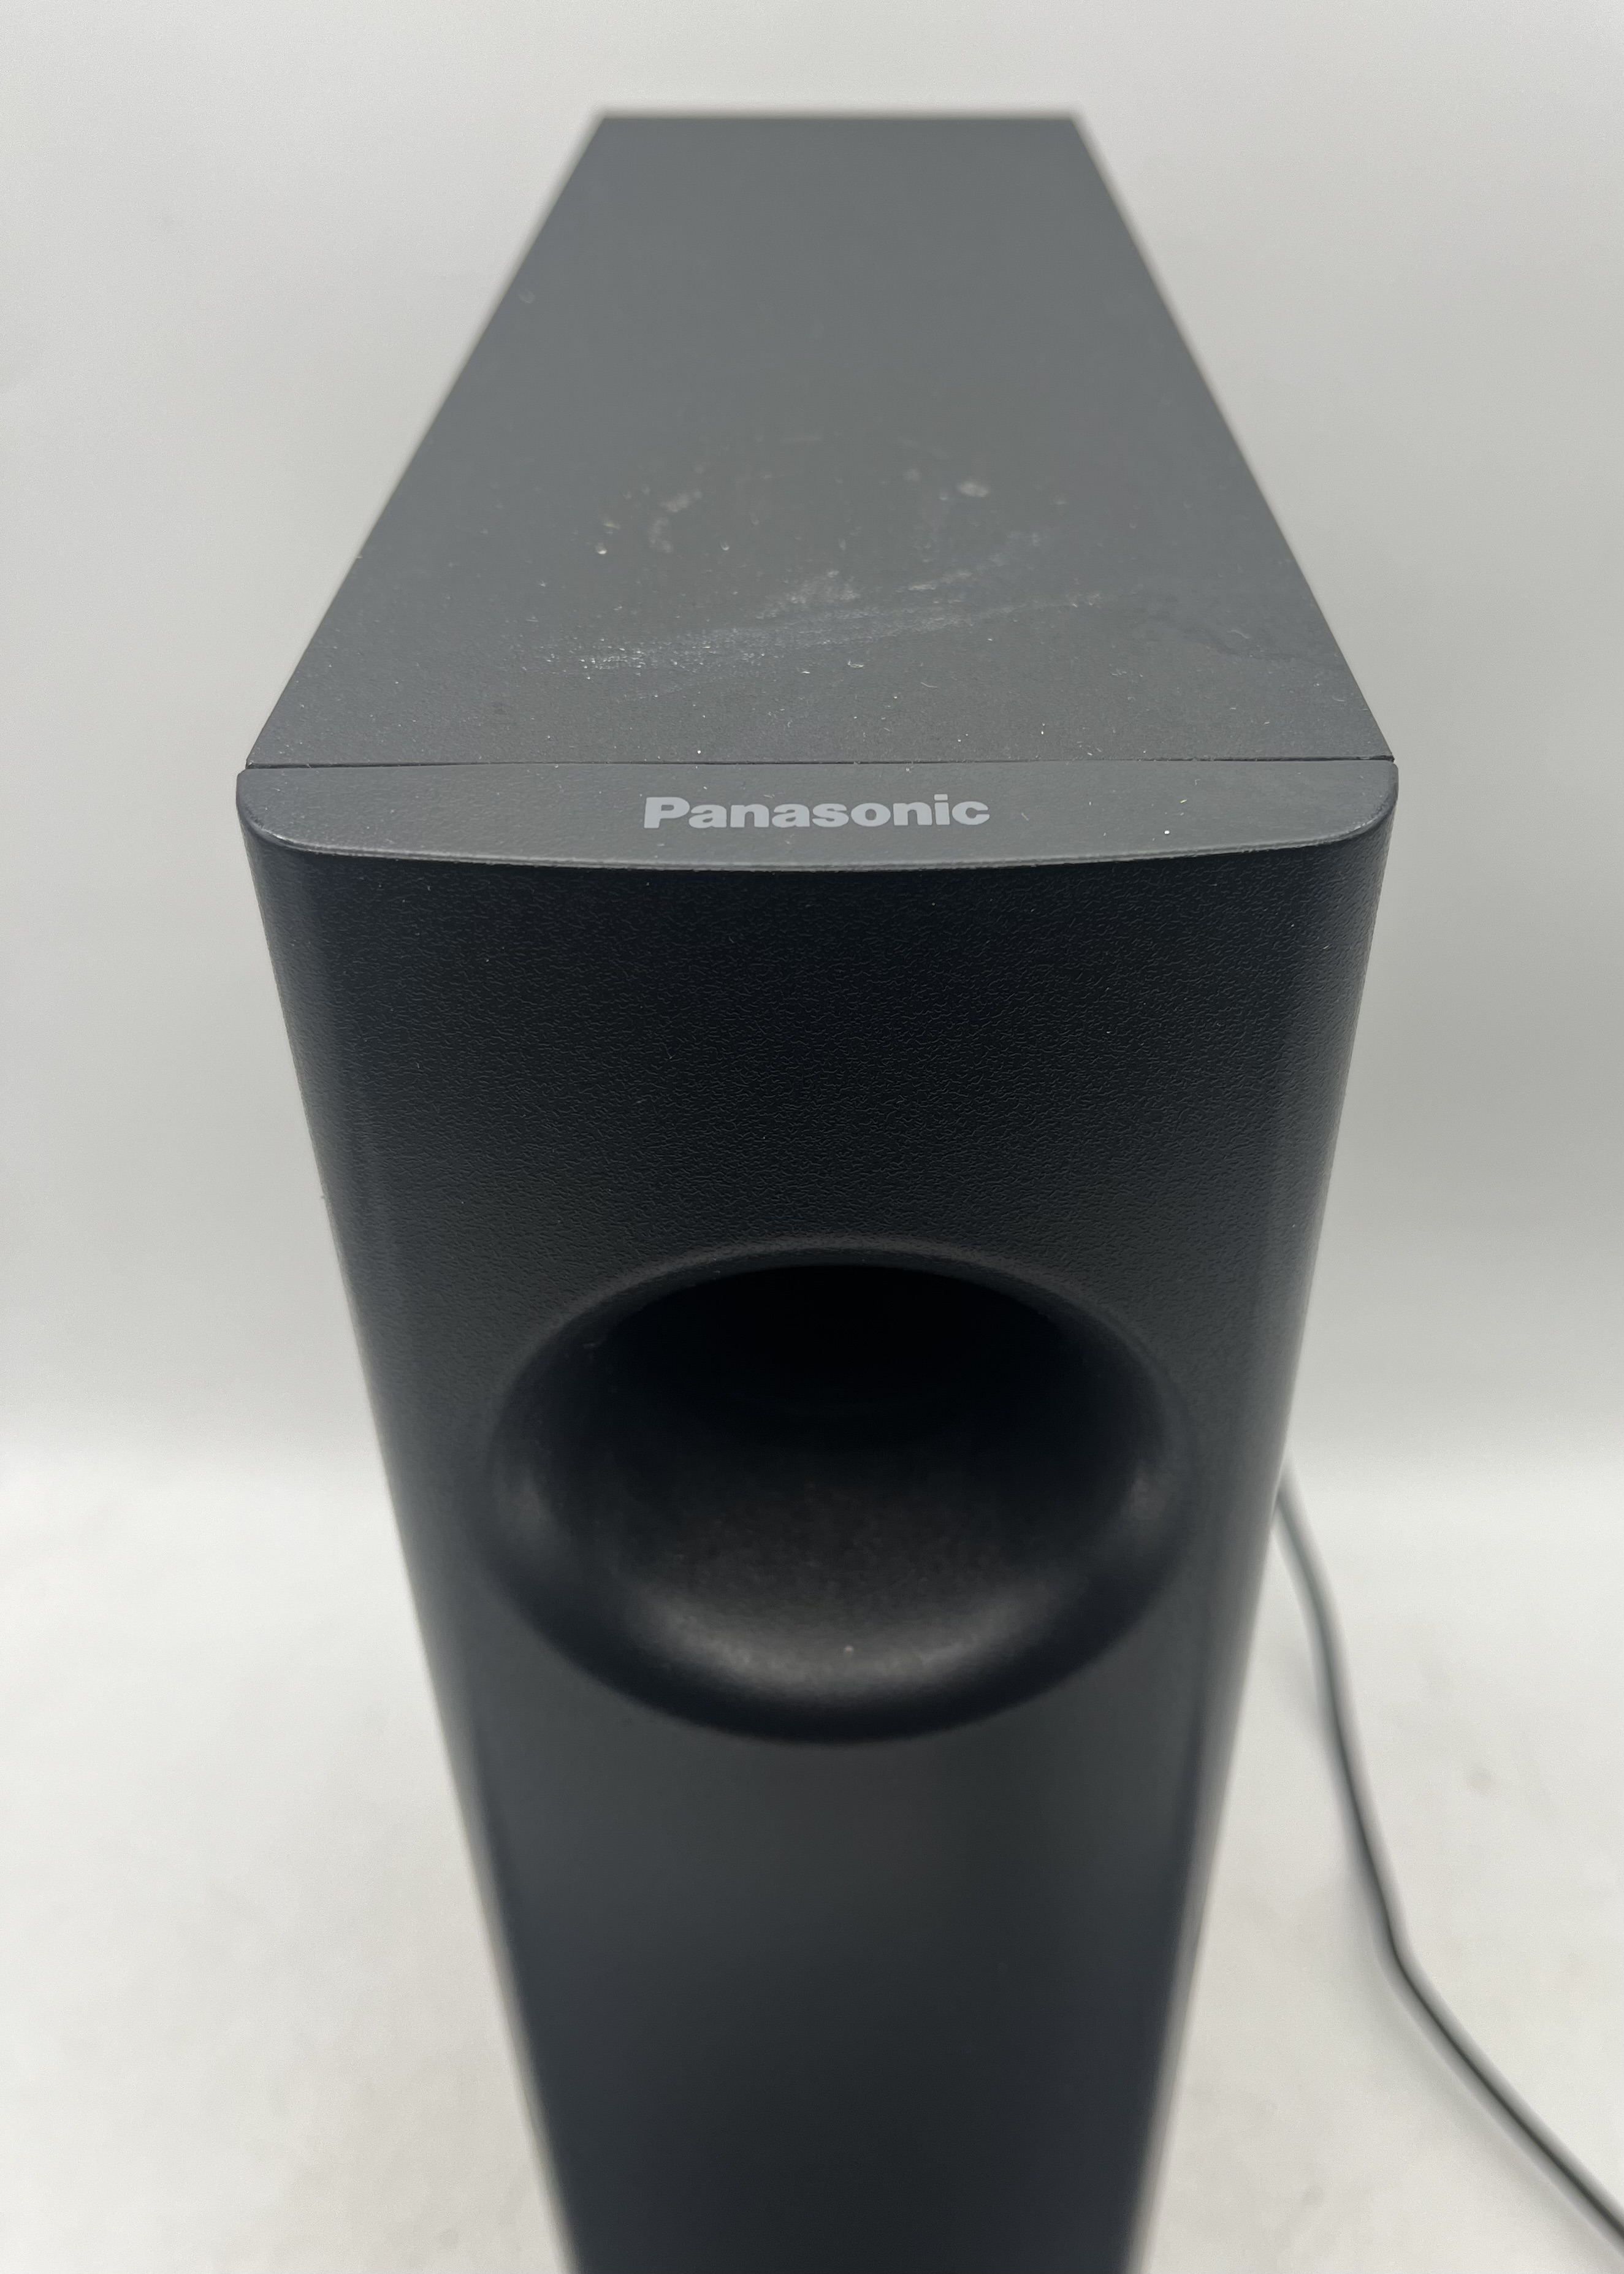 A Panasonic home theater audio system comprising an SU-HTB258 soundbar and an SB-HWA250 sub- woofer - Image 7 of 8